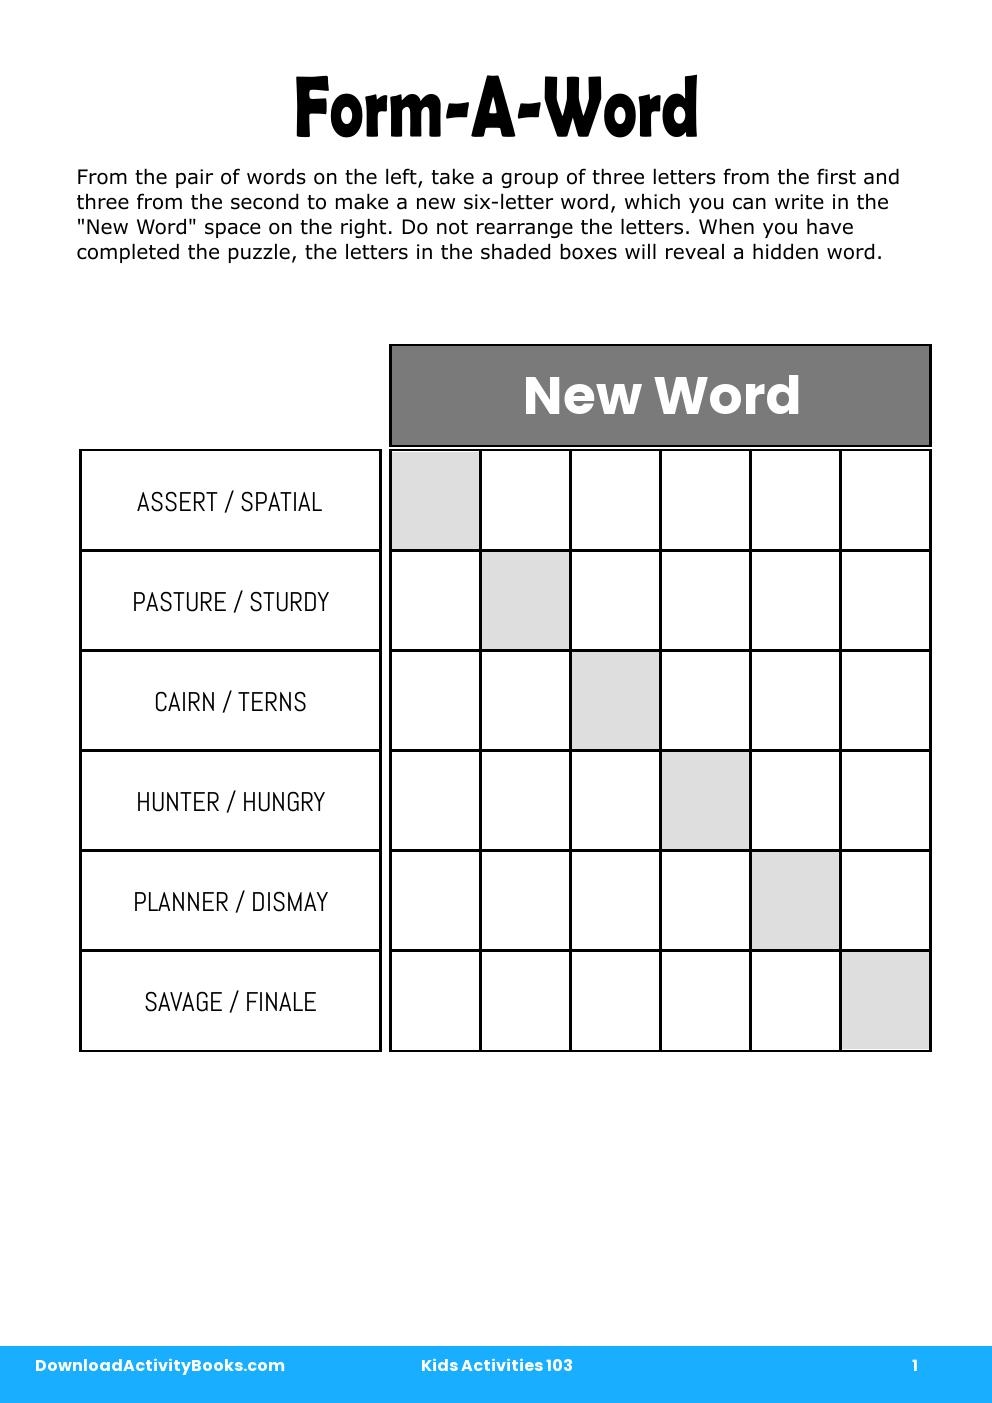 Form-A-Word in Kids Activities 103